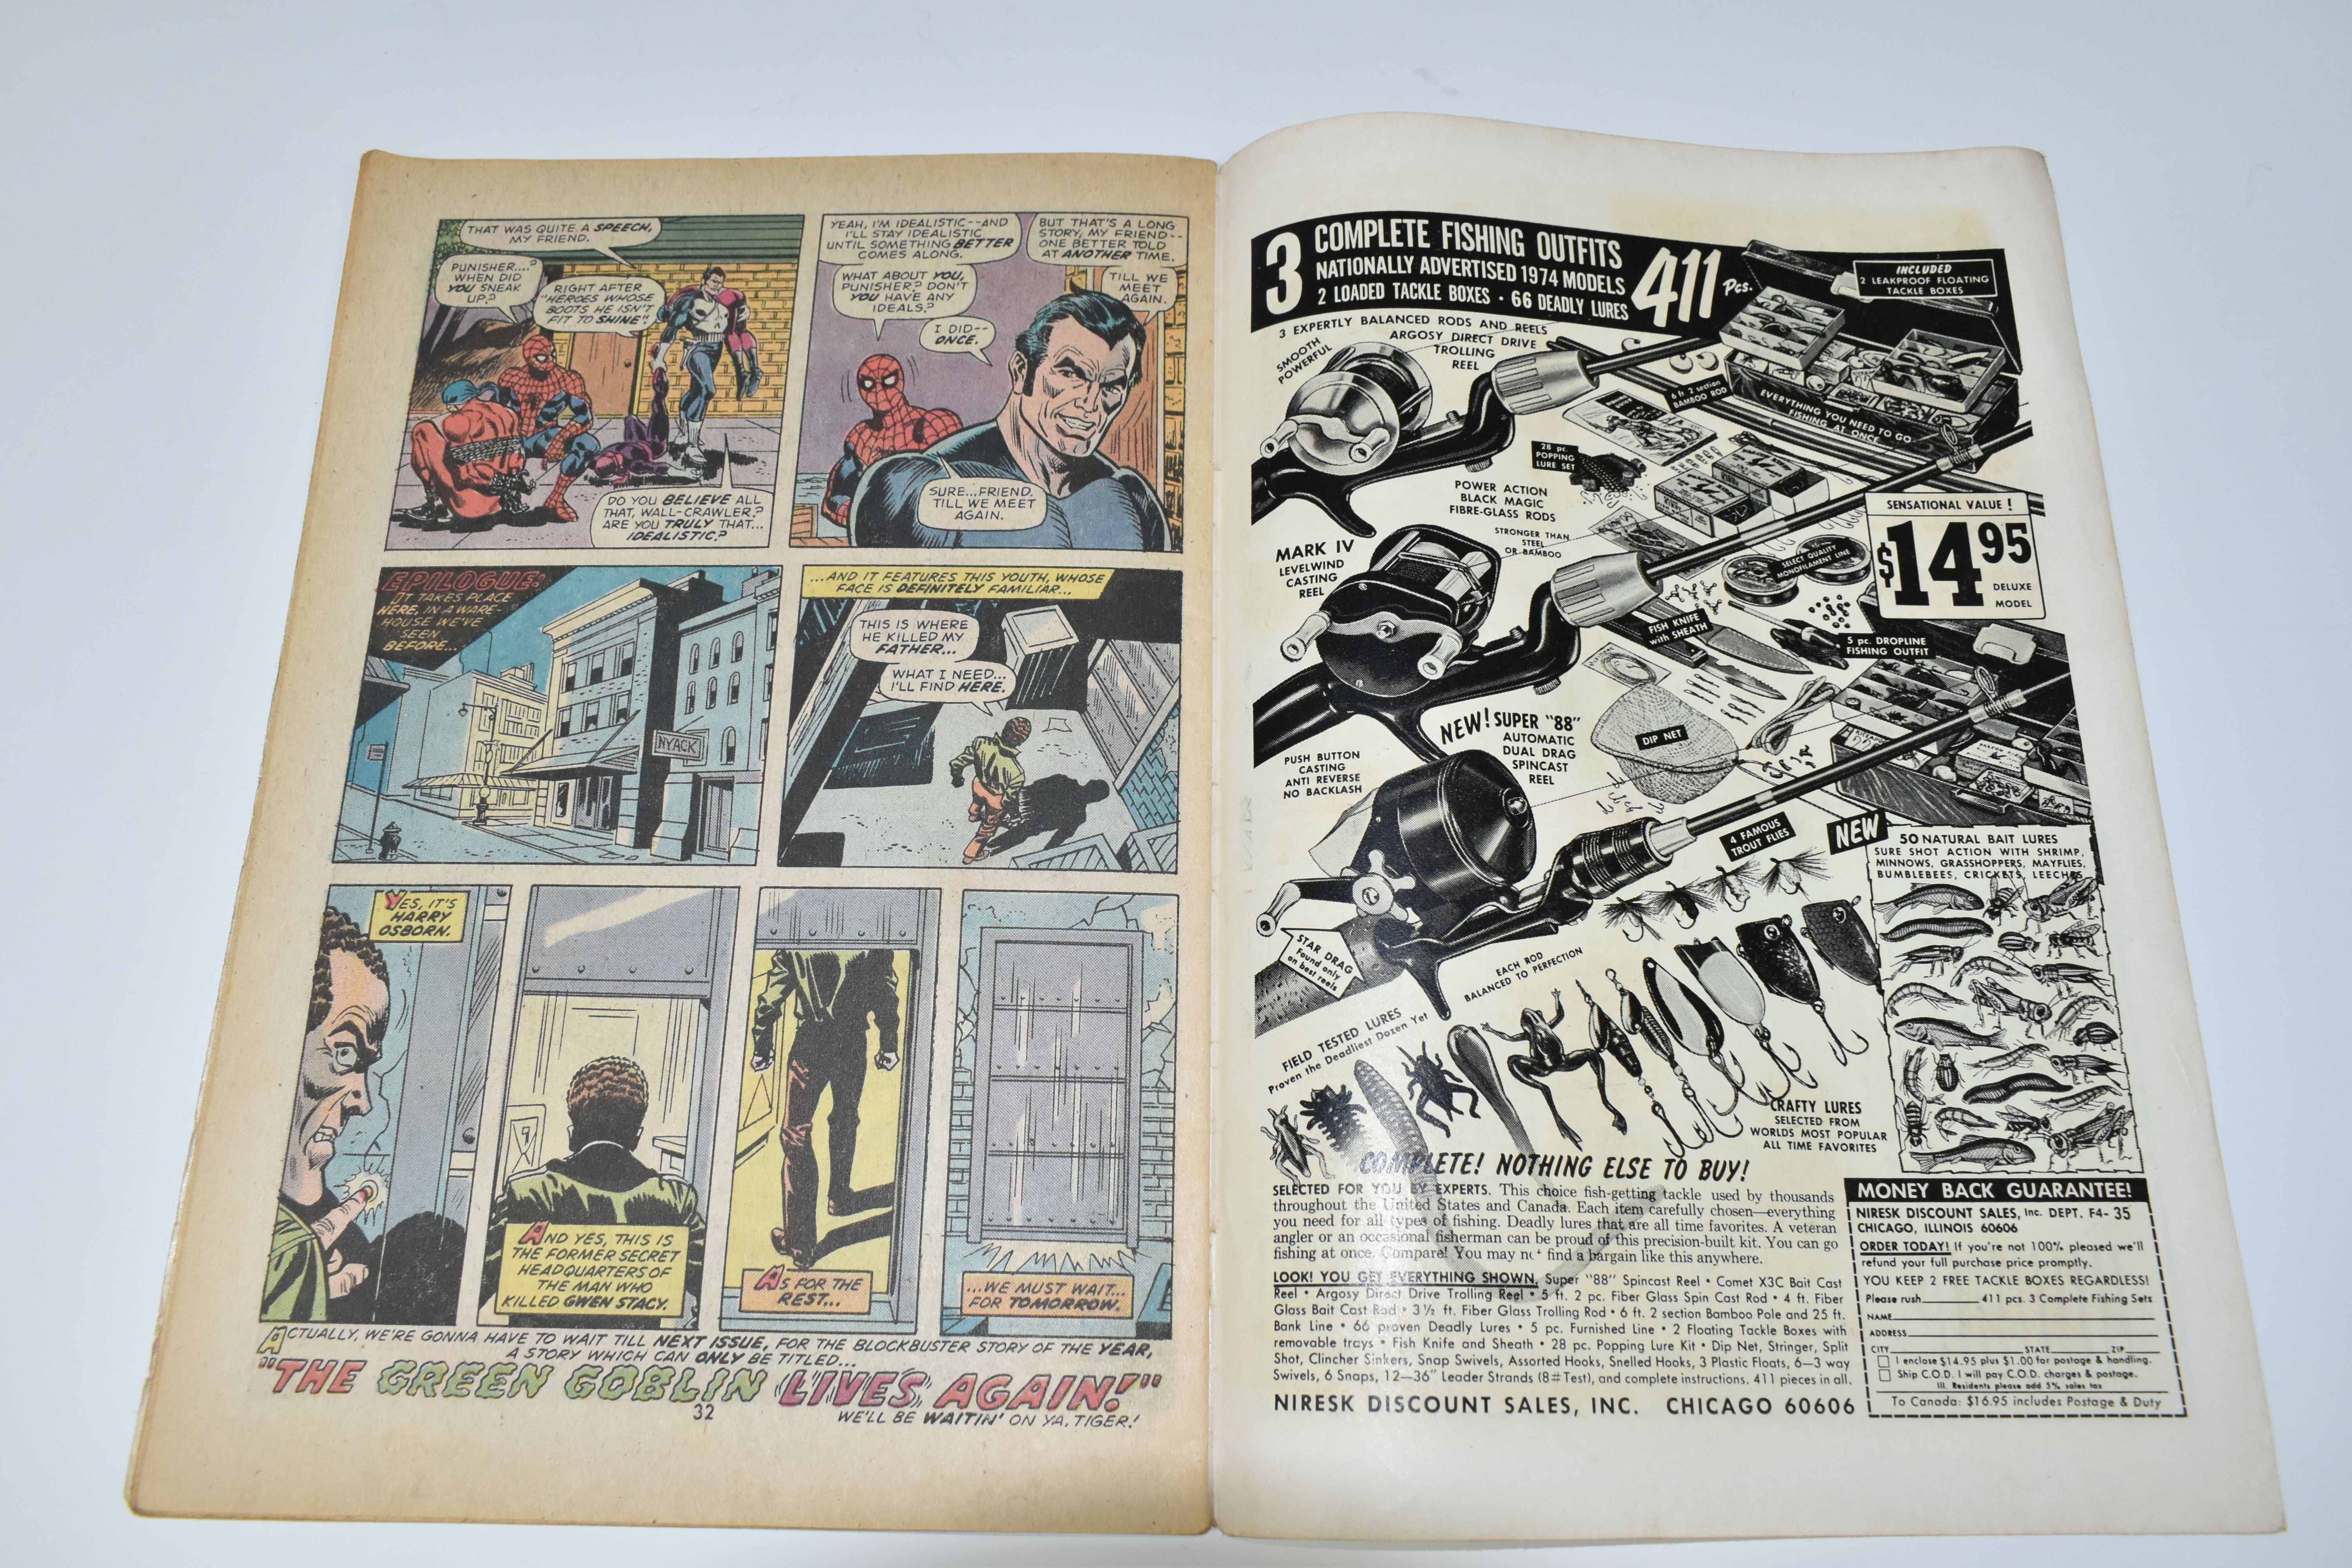 AMAZING SPIDER-MAN No. 135, second appearance of The Punisher, front cover has some minor creases, - Image 5 of 6